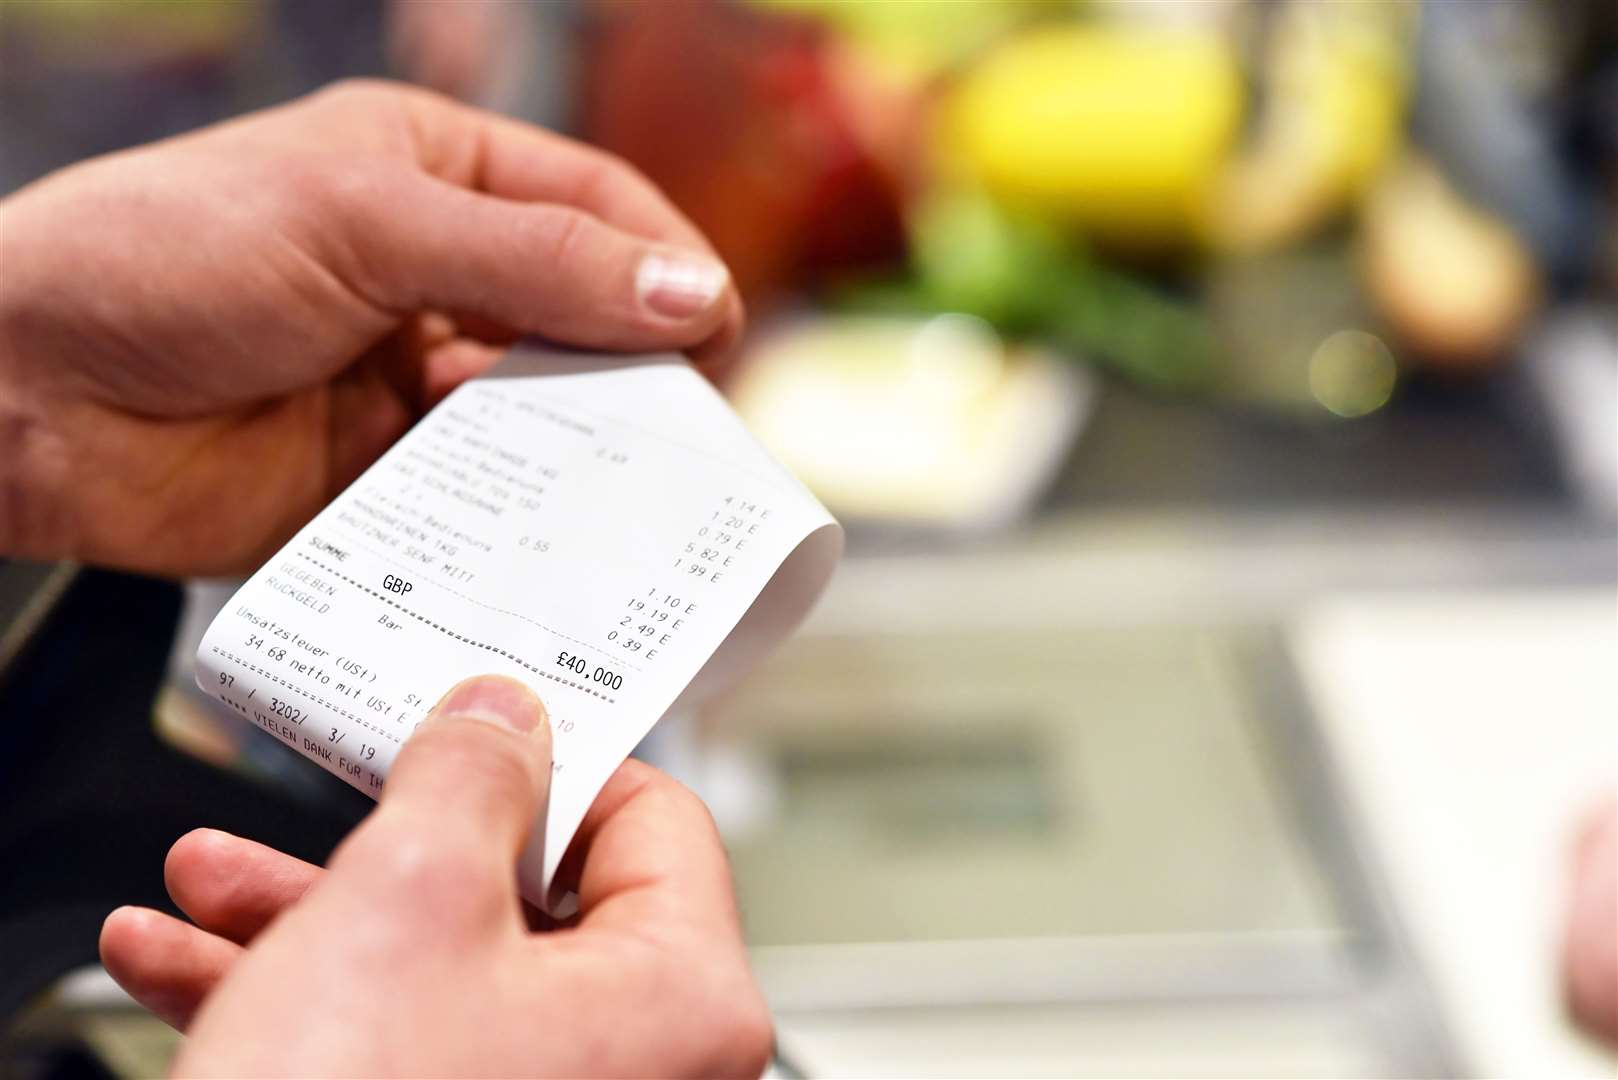 Shopping bills are now increasing by about £54 a month says latest research into rising prices. Image: Stock photo.